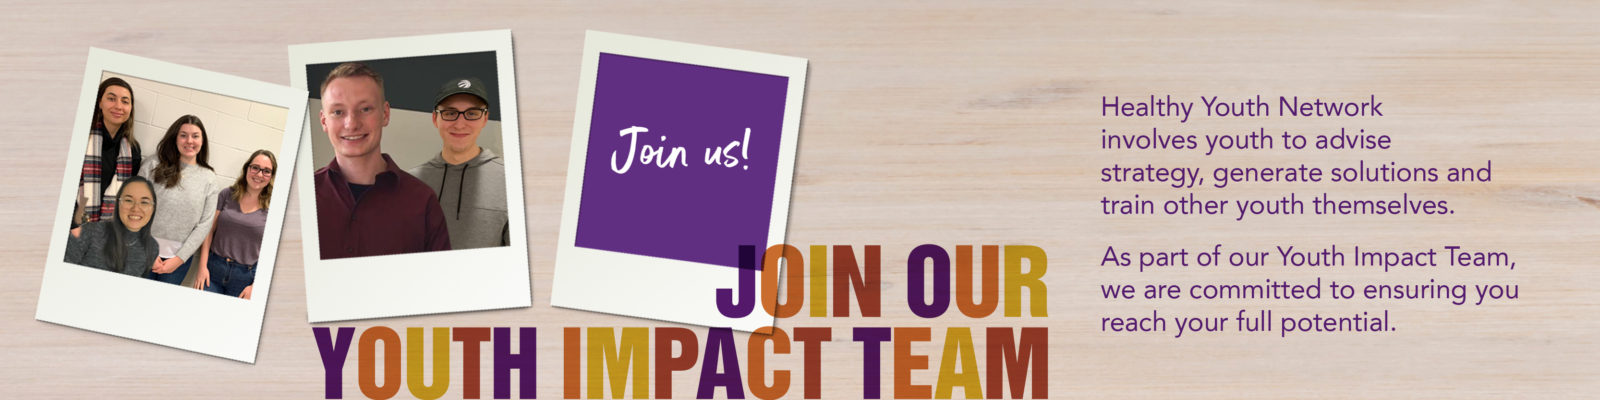 Join our Youth Impact Team